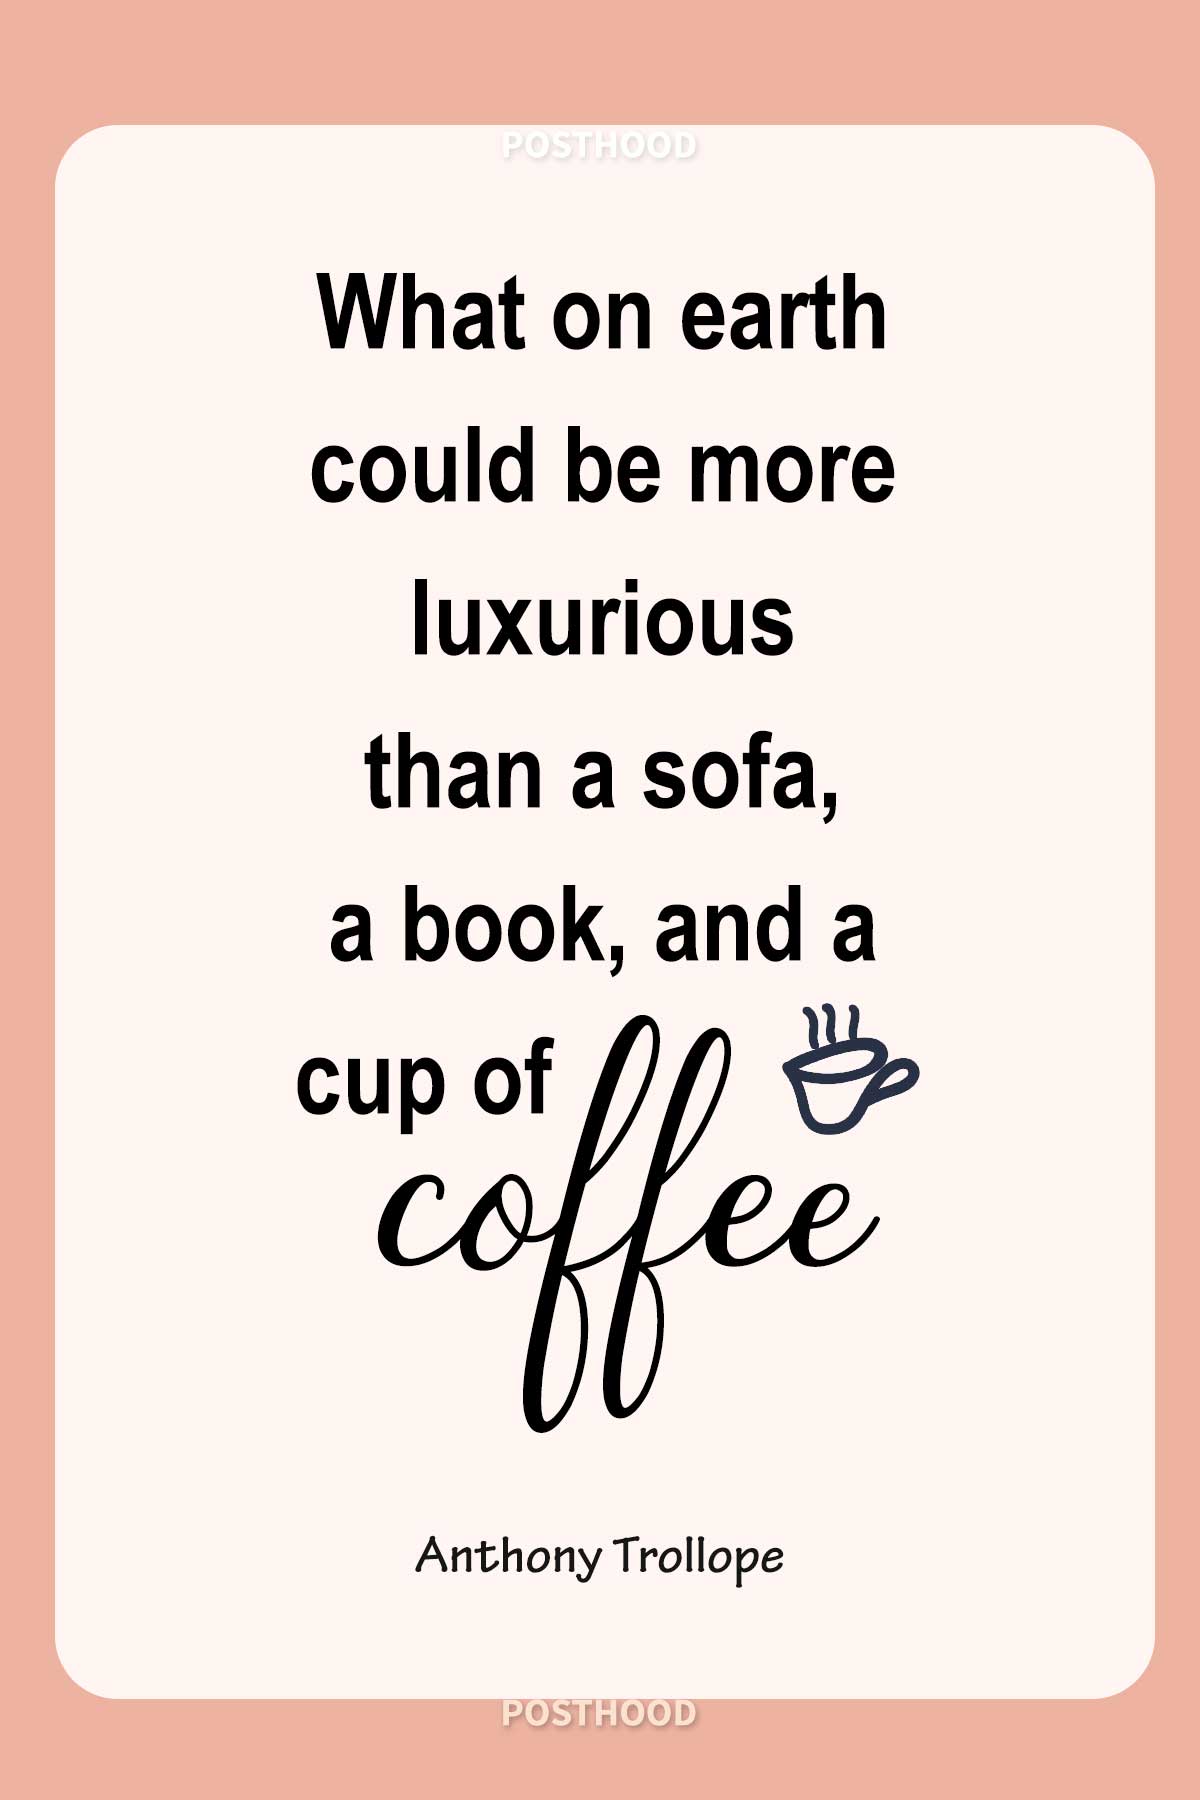 Relax and enjoy your me time with these fun and humor coffee quotes that will show how much you crave coffee when alone.